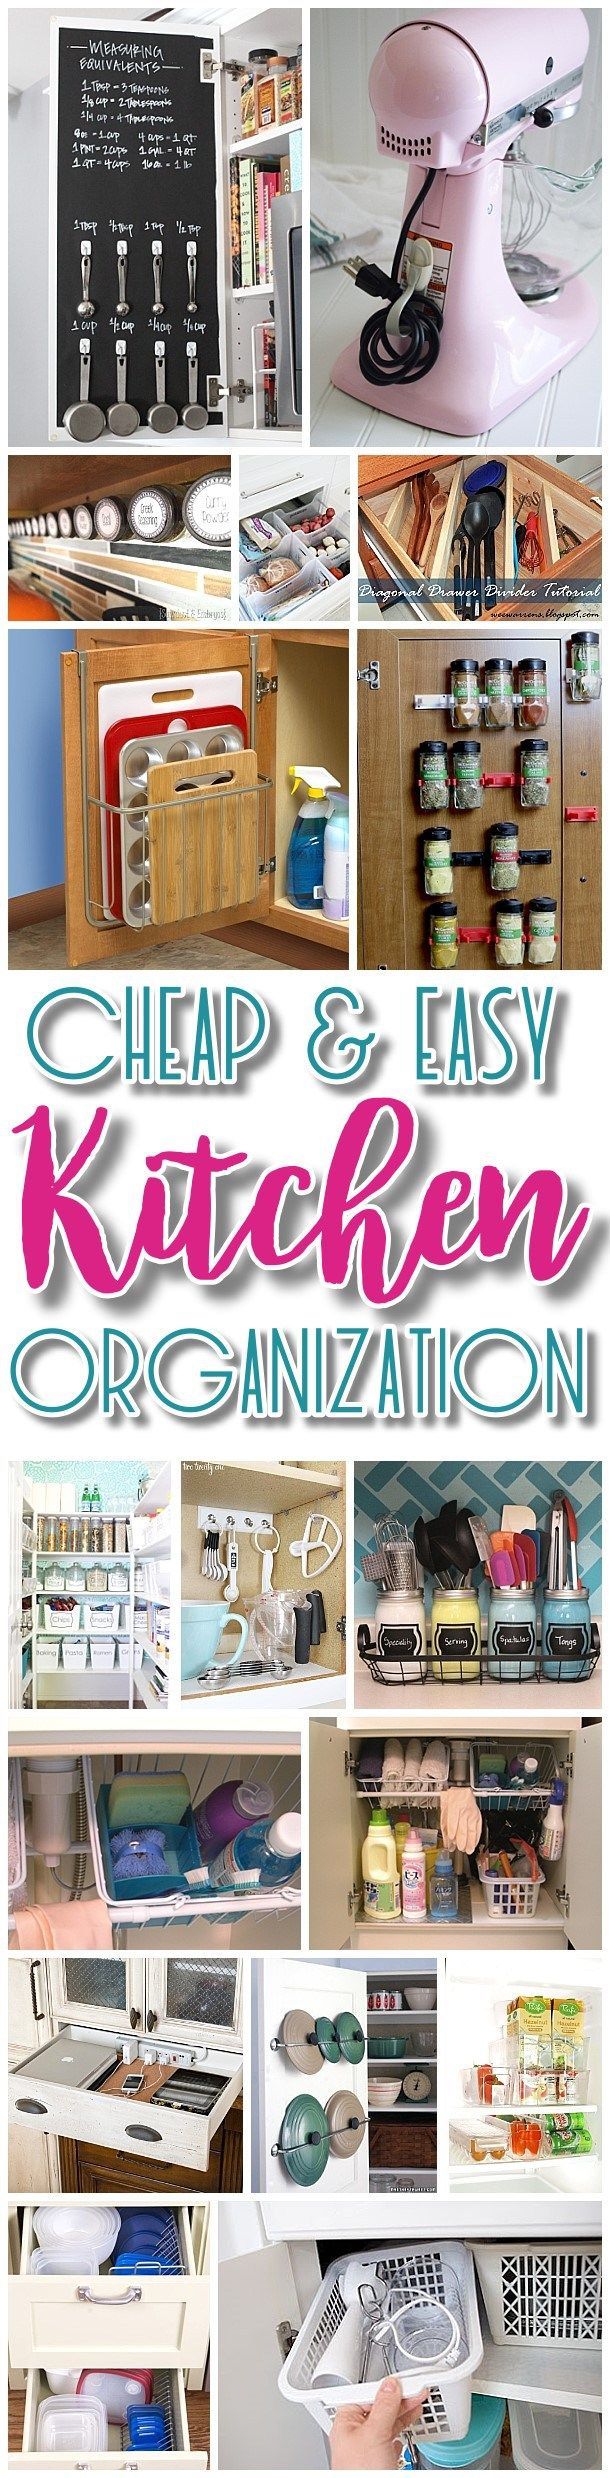 Easy and Budget Friendly Ways to Organize your Kitchen – Hacks, Ideas, Space Saving tips and tricks for Quick Organization in a